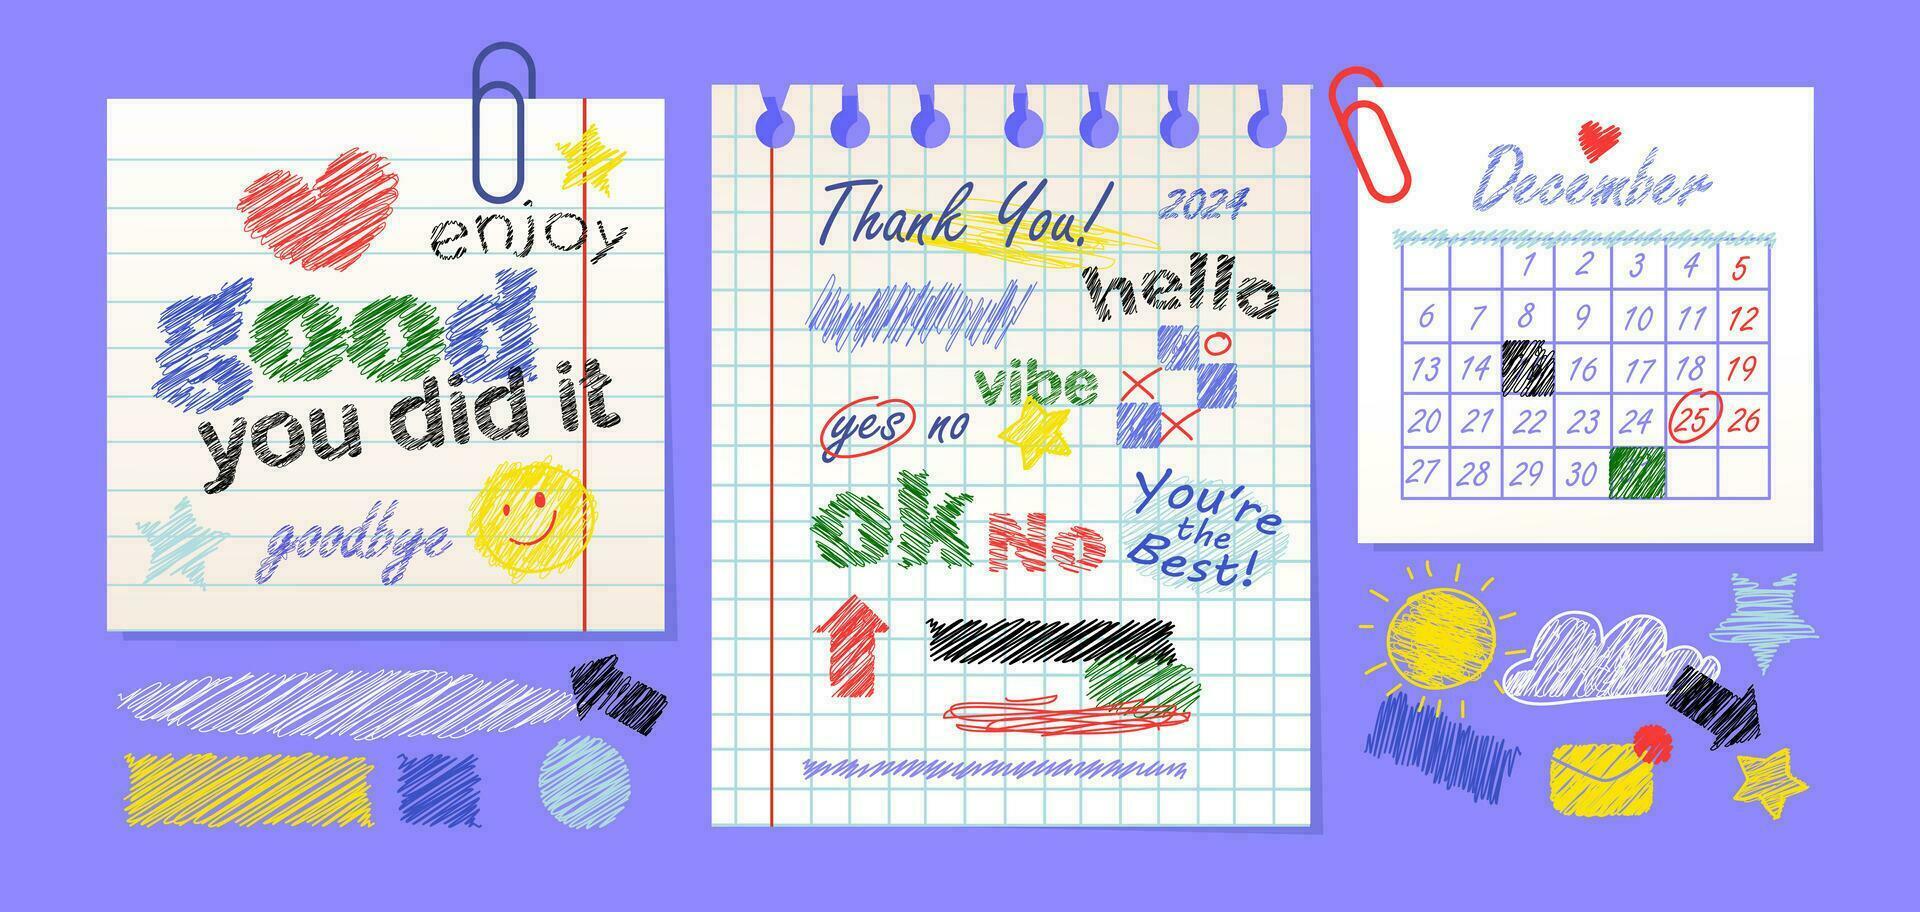 Paper notes, sheets with lines of colorful pencils. Design elements and quotes in the style of a pen stroke for the weekly planner. Vector illustration